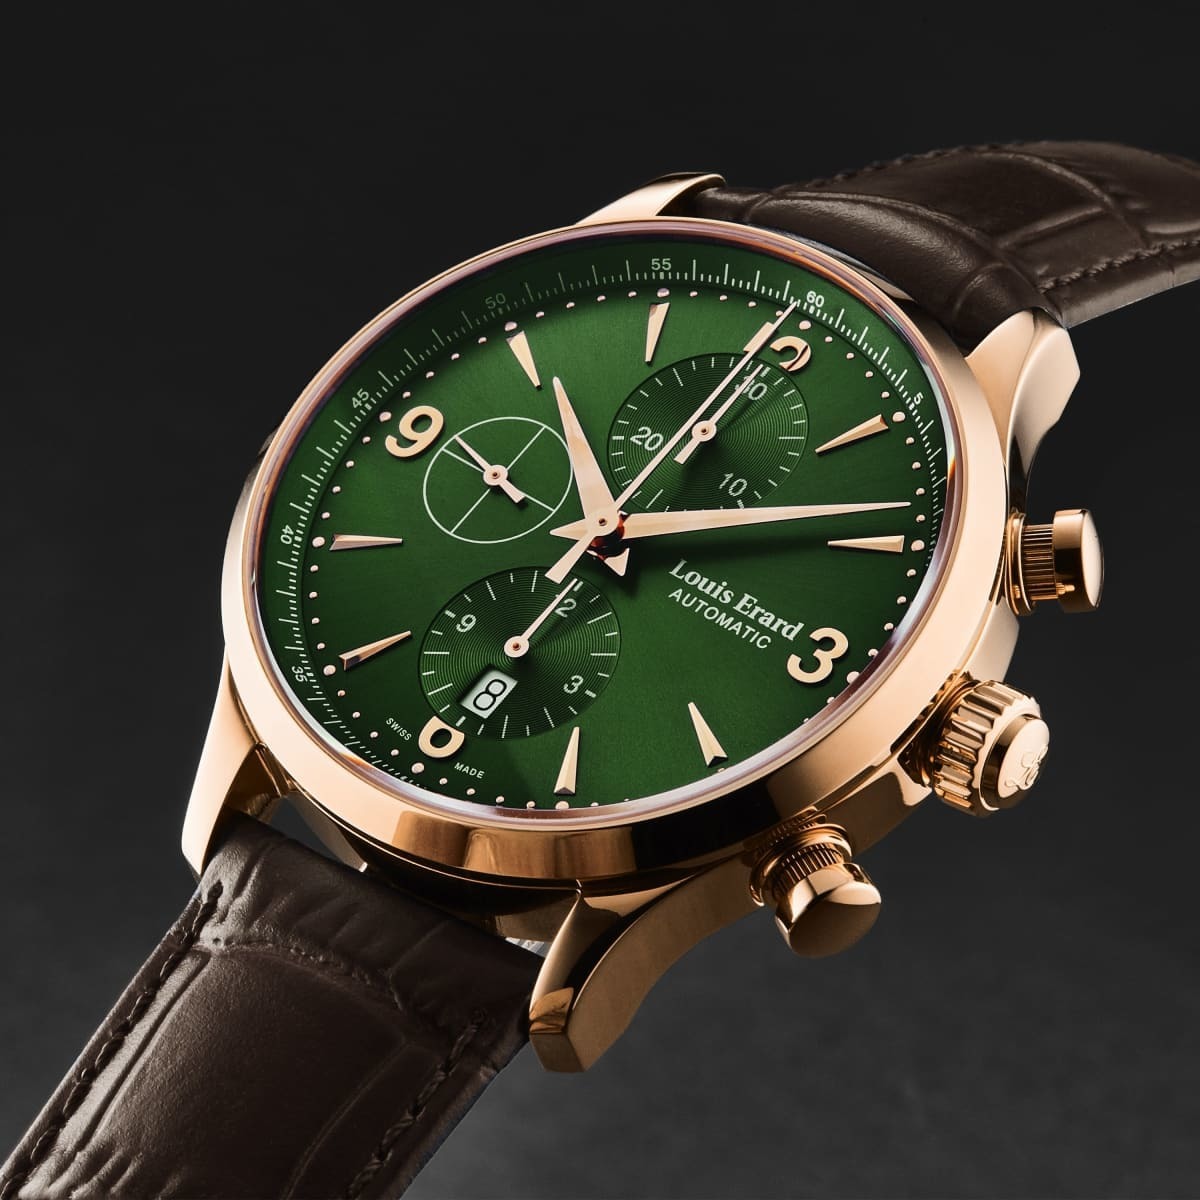 A Louis Erard Men's '1931' Chronograph Green Dial Brown Leather Strap Automatic Watch 78225PR19.BRC03 with a green dial and brown leather strap.